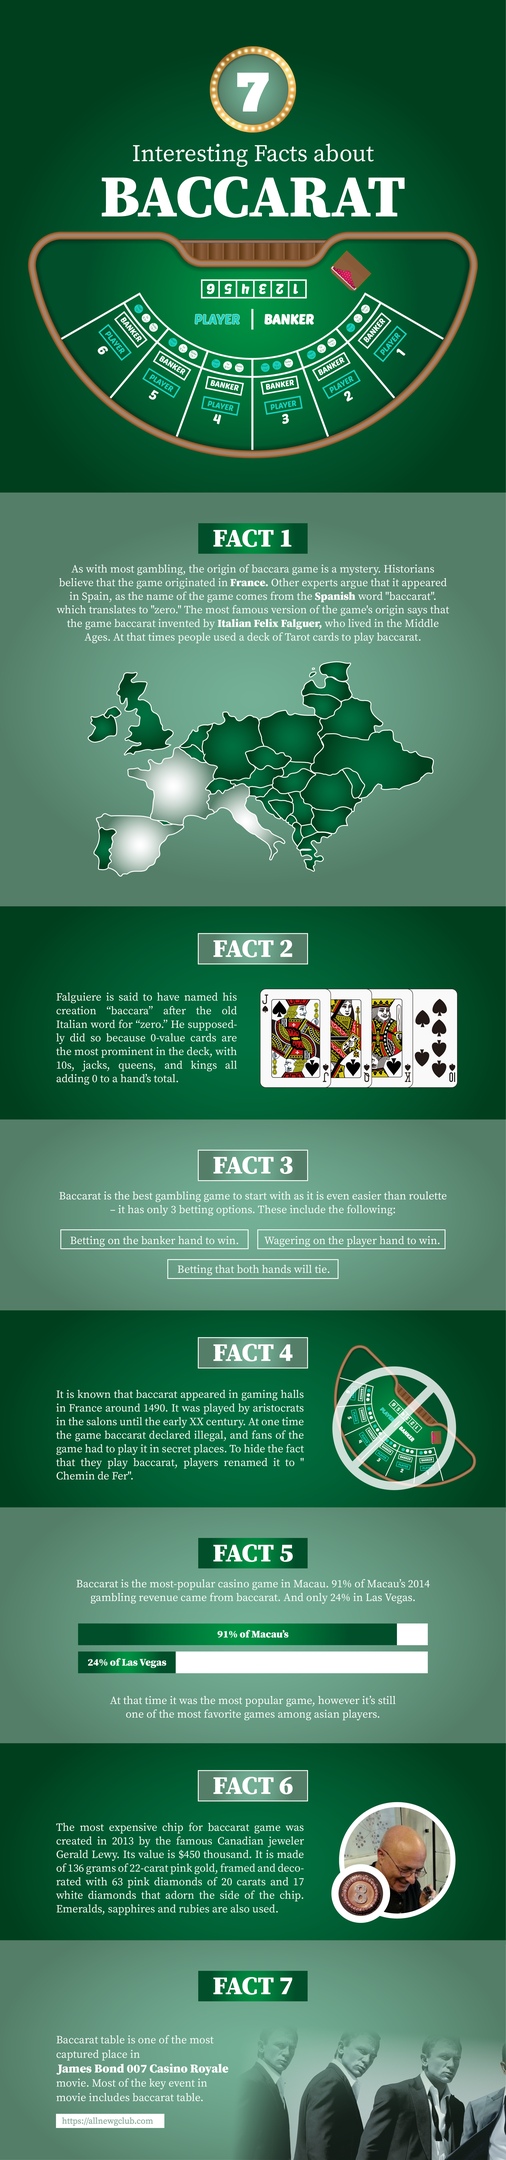 Baccarat infographic